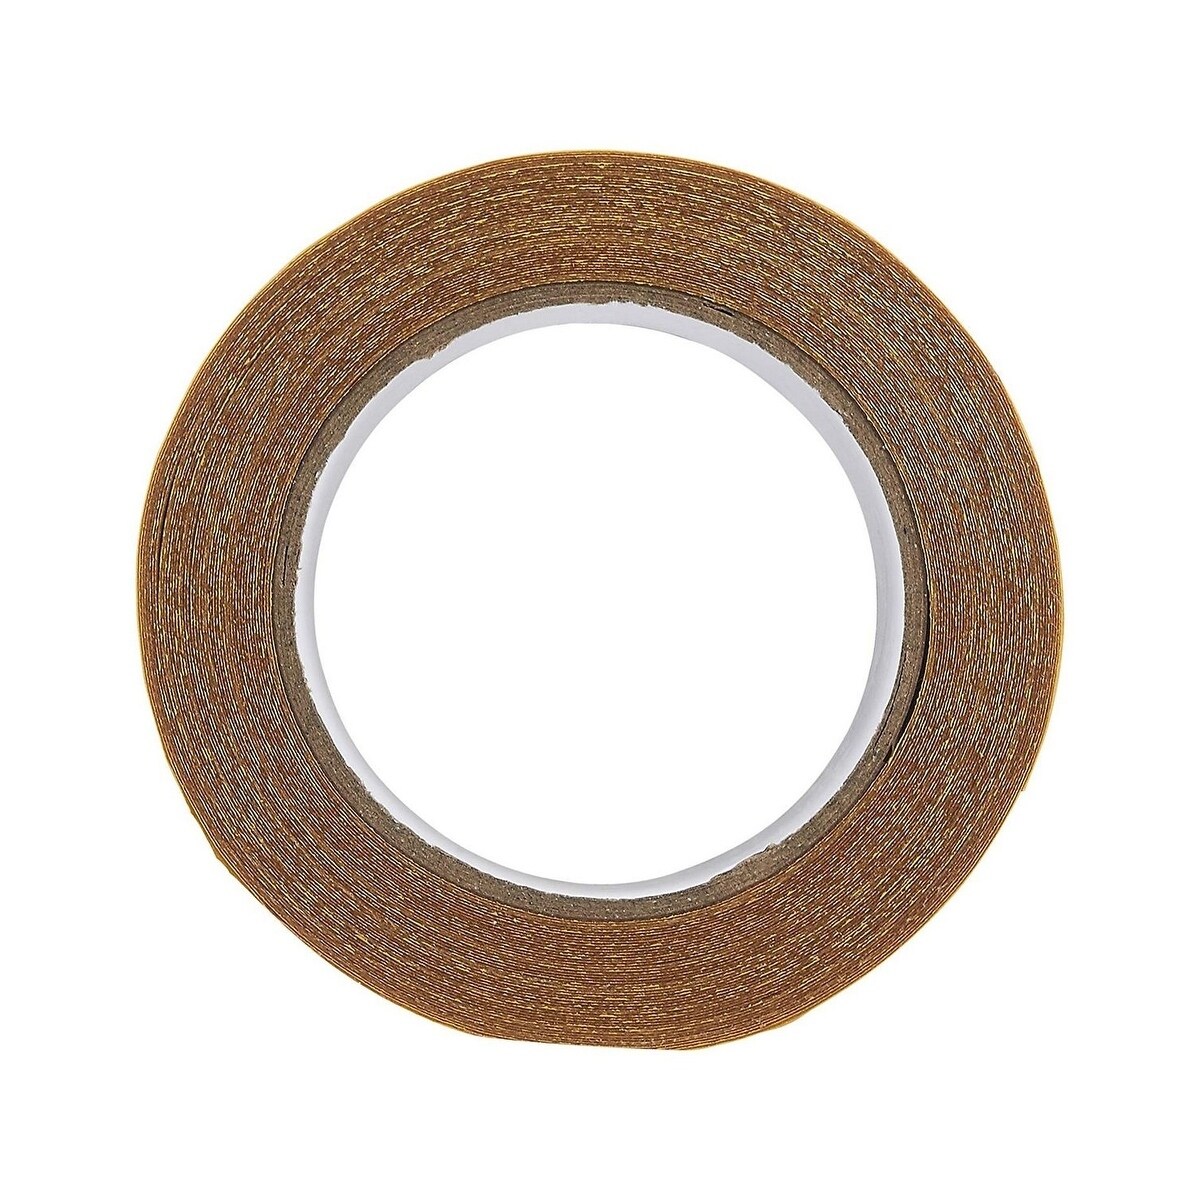 https://ak1.ostkcdn.com/images/products/28753558/Heavy-Duty-Double-Sided-Tape-for-Fabric-Anti-Skid-Carpet-Tape-for-Area-Rugs-52d21b03-0870-42b5-a36c-2eaa640b0927.jpg